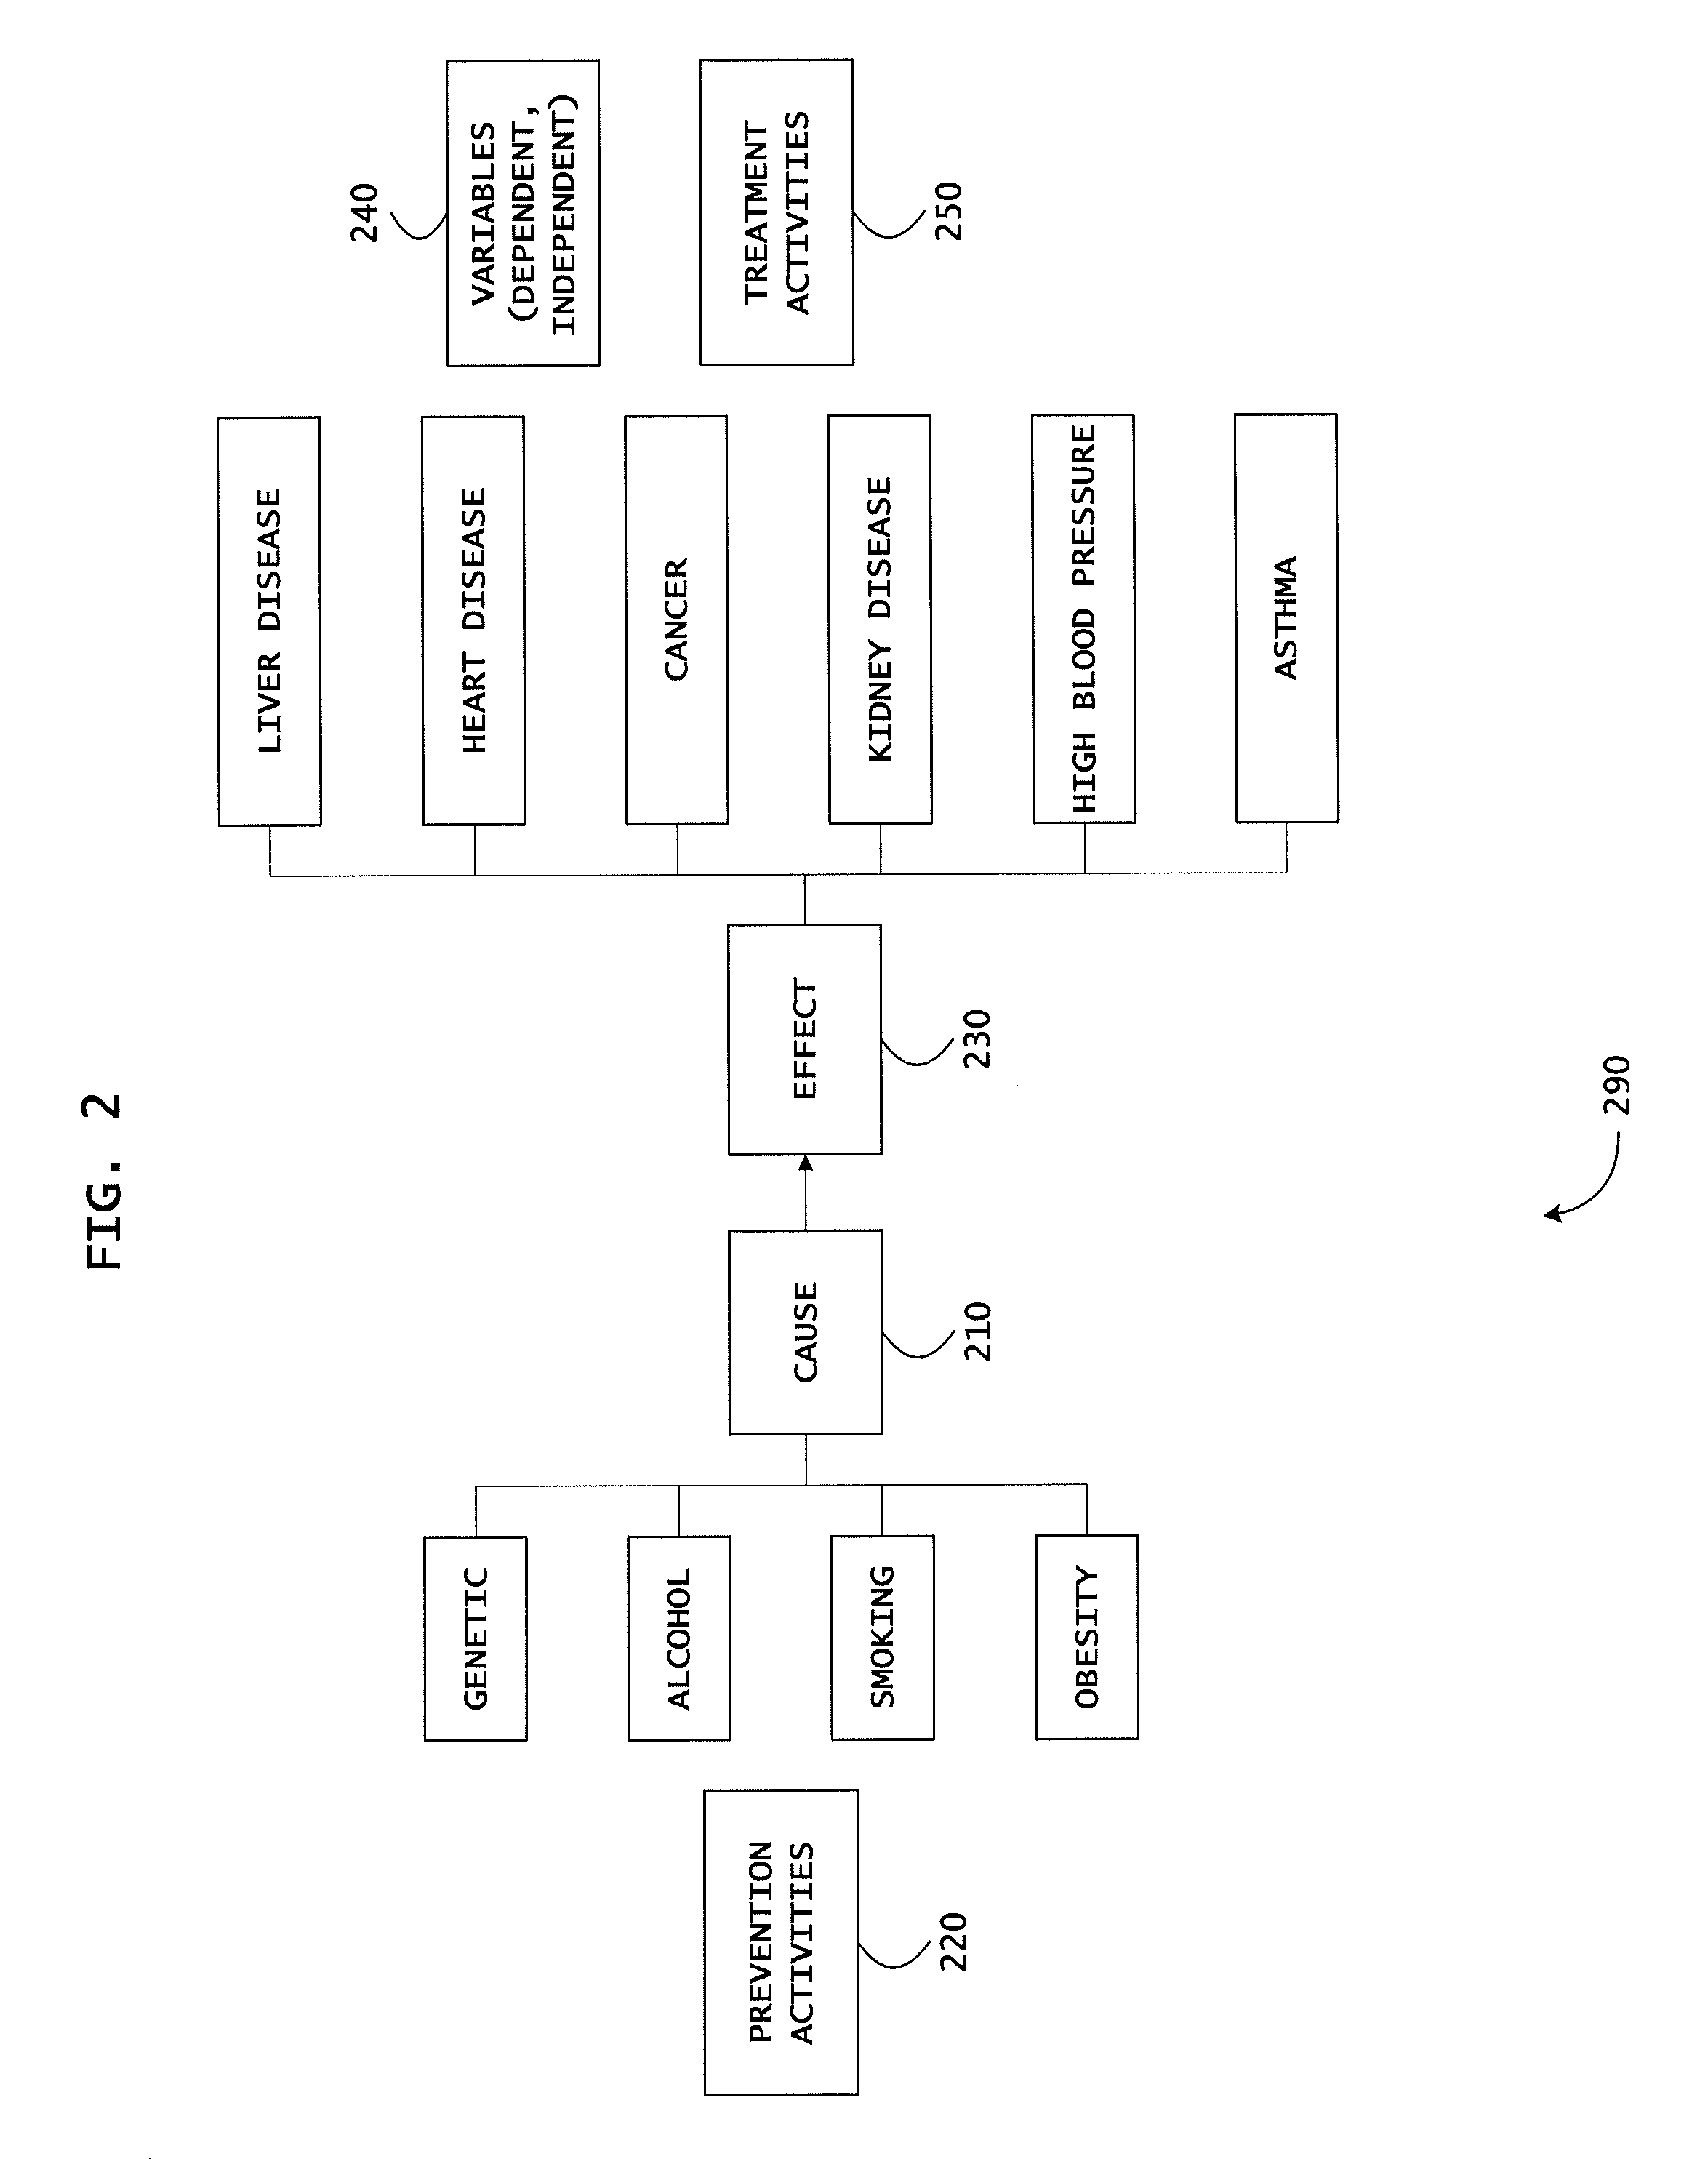 System and method for evidence based differential analysis and incentives based heal thcare policy